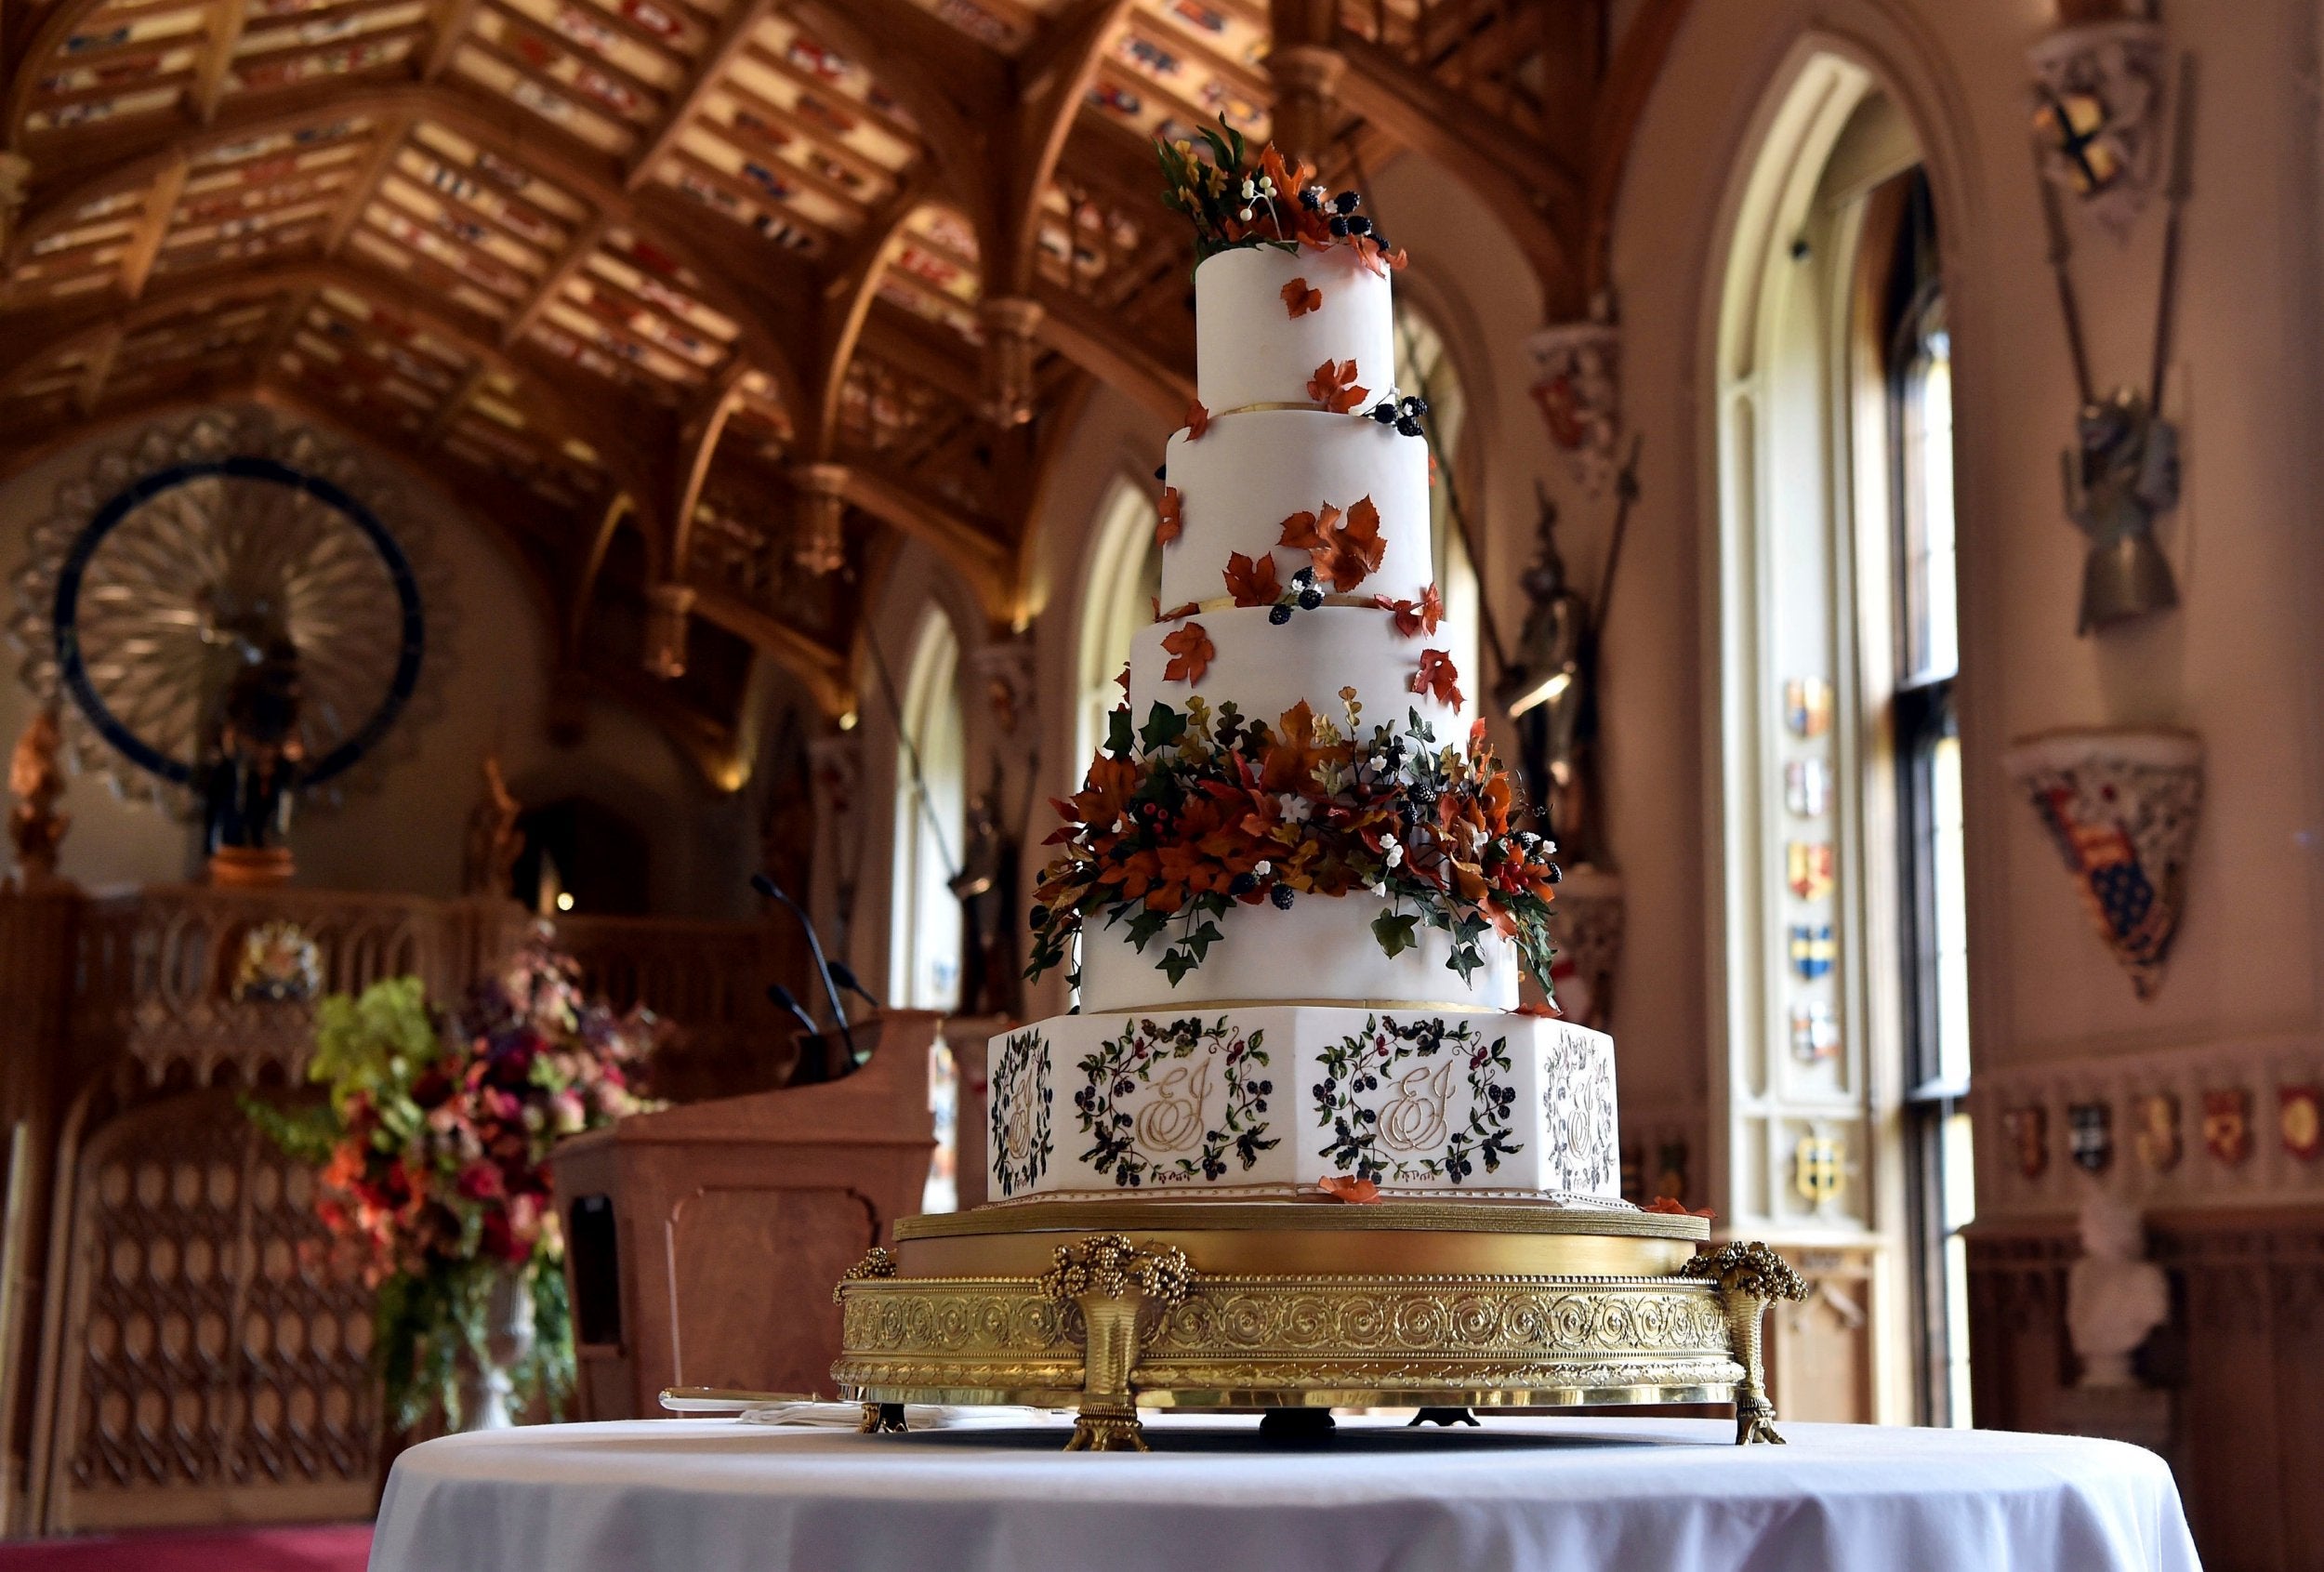 The wedding cake created by Sophie Cabot for the wedding of Princess Eugenie of York and Jack Brooksbank